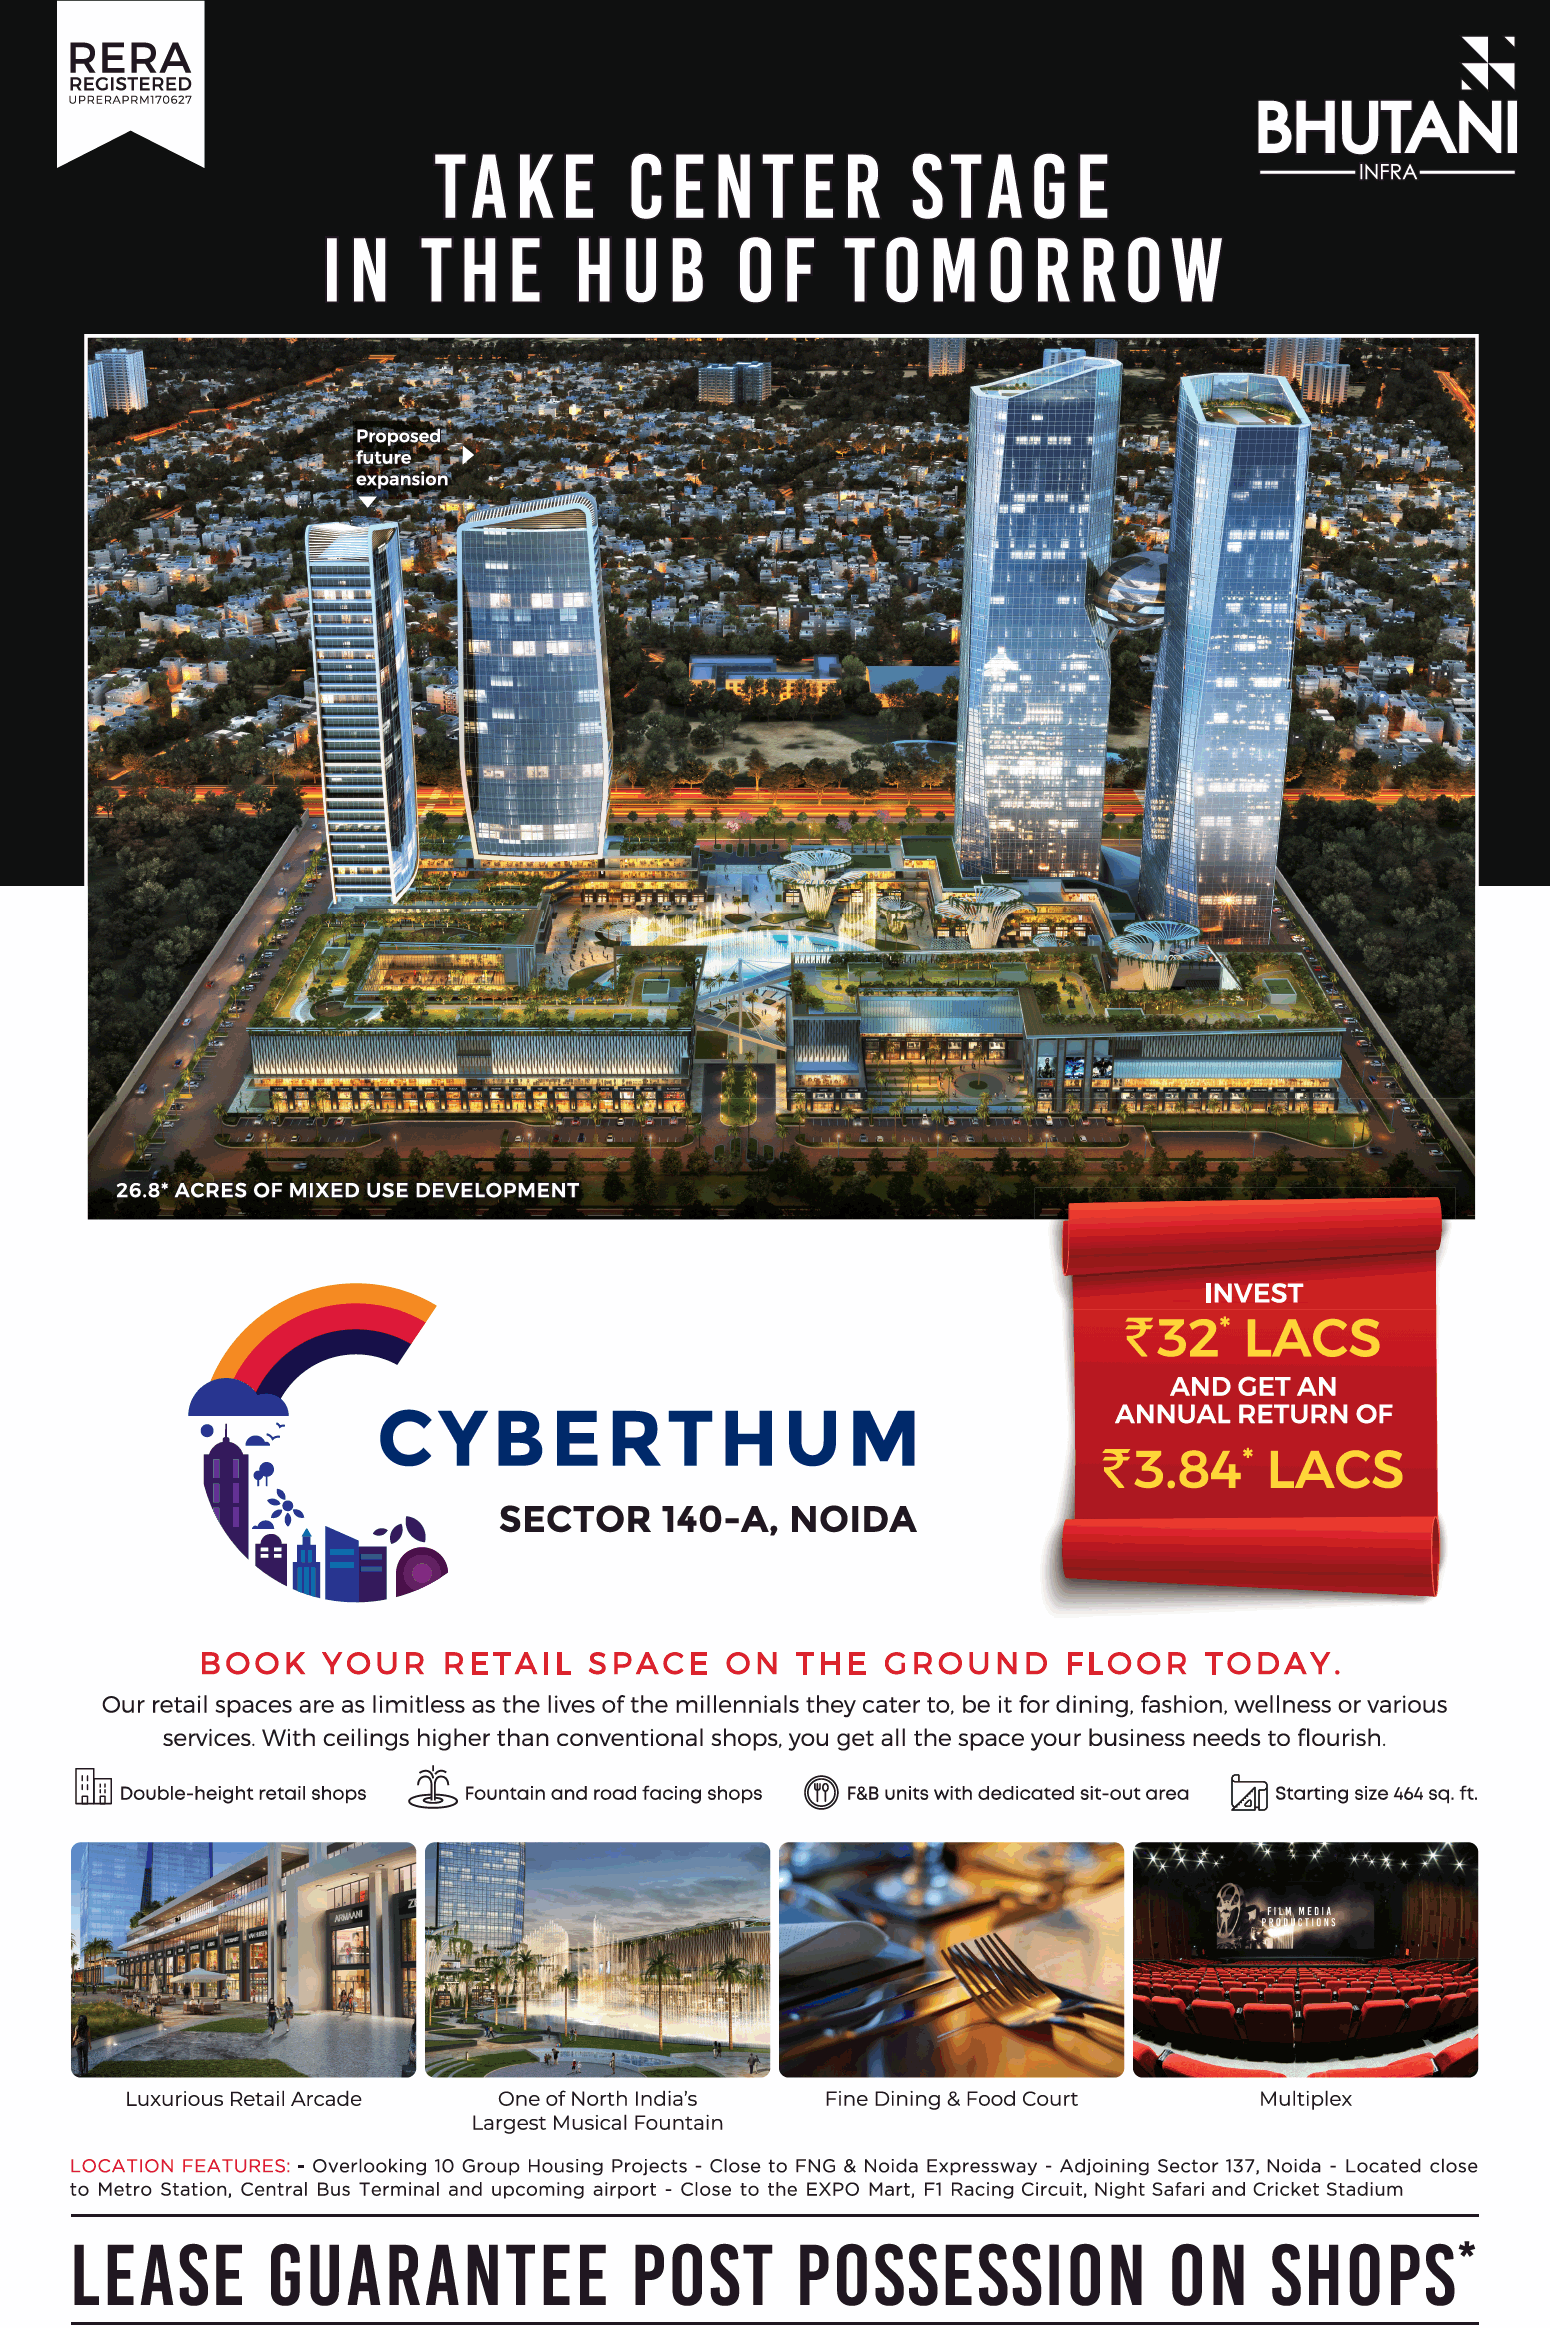 Book your retail space on the ground floor at Bhutani Cyberthum, Noida